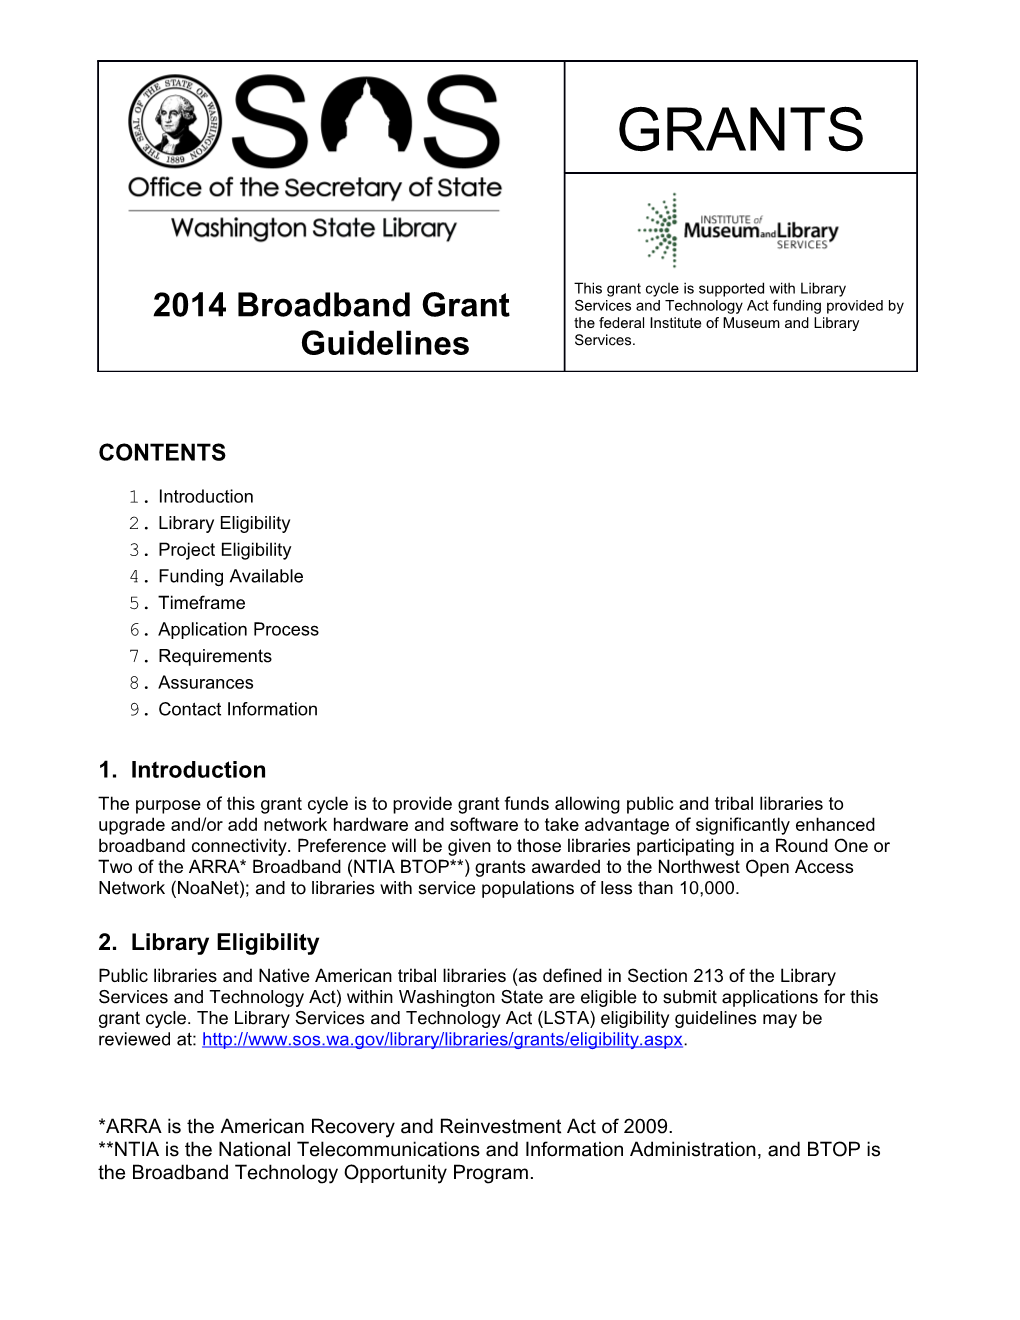 2014 Grant Guidelines